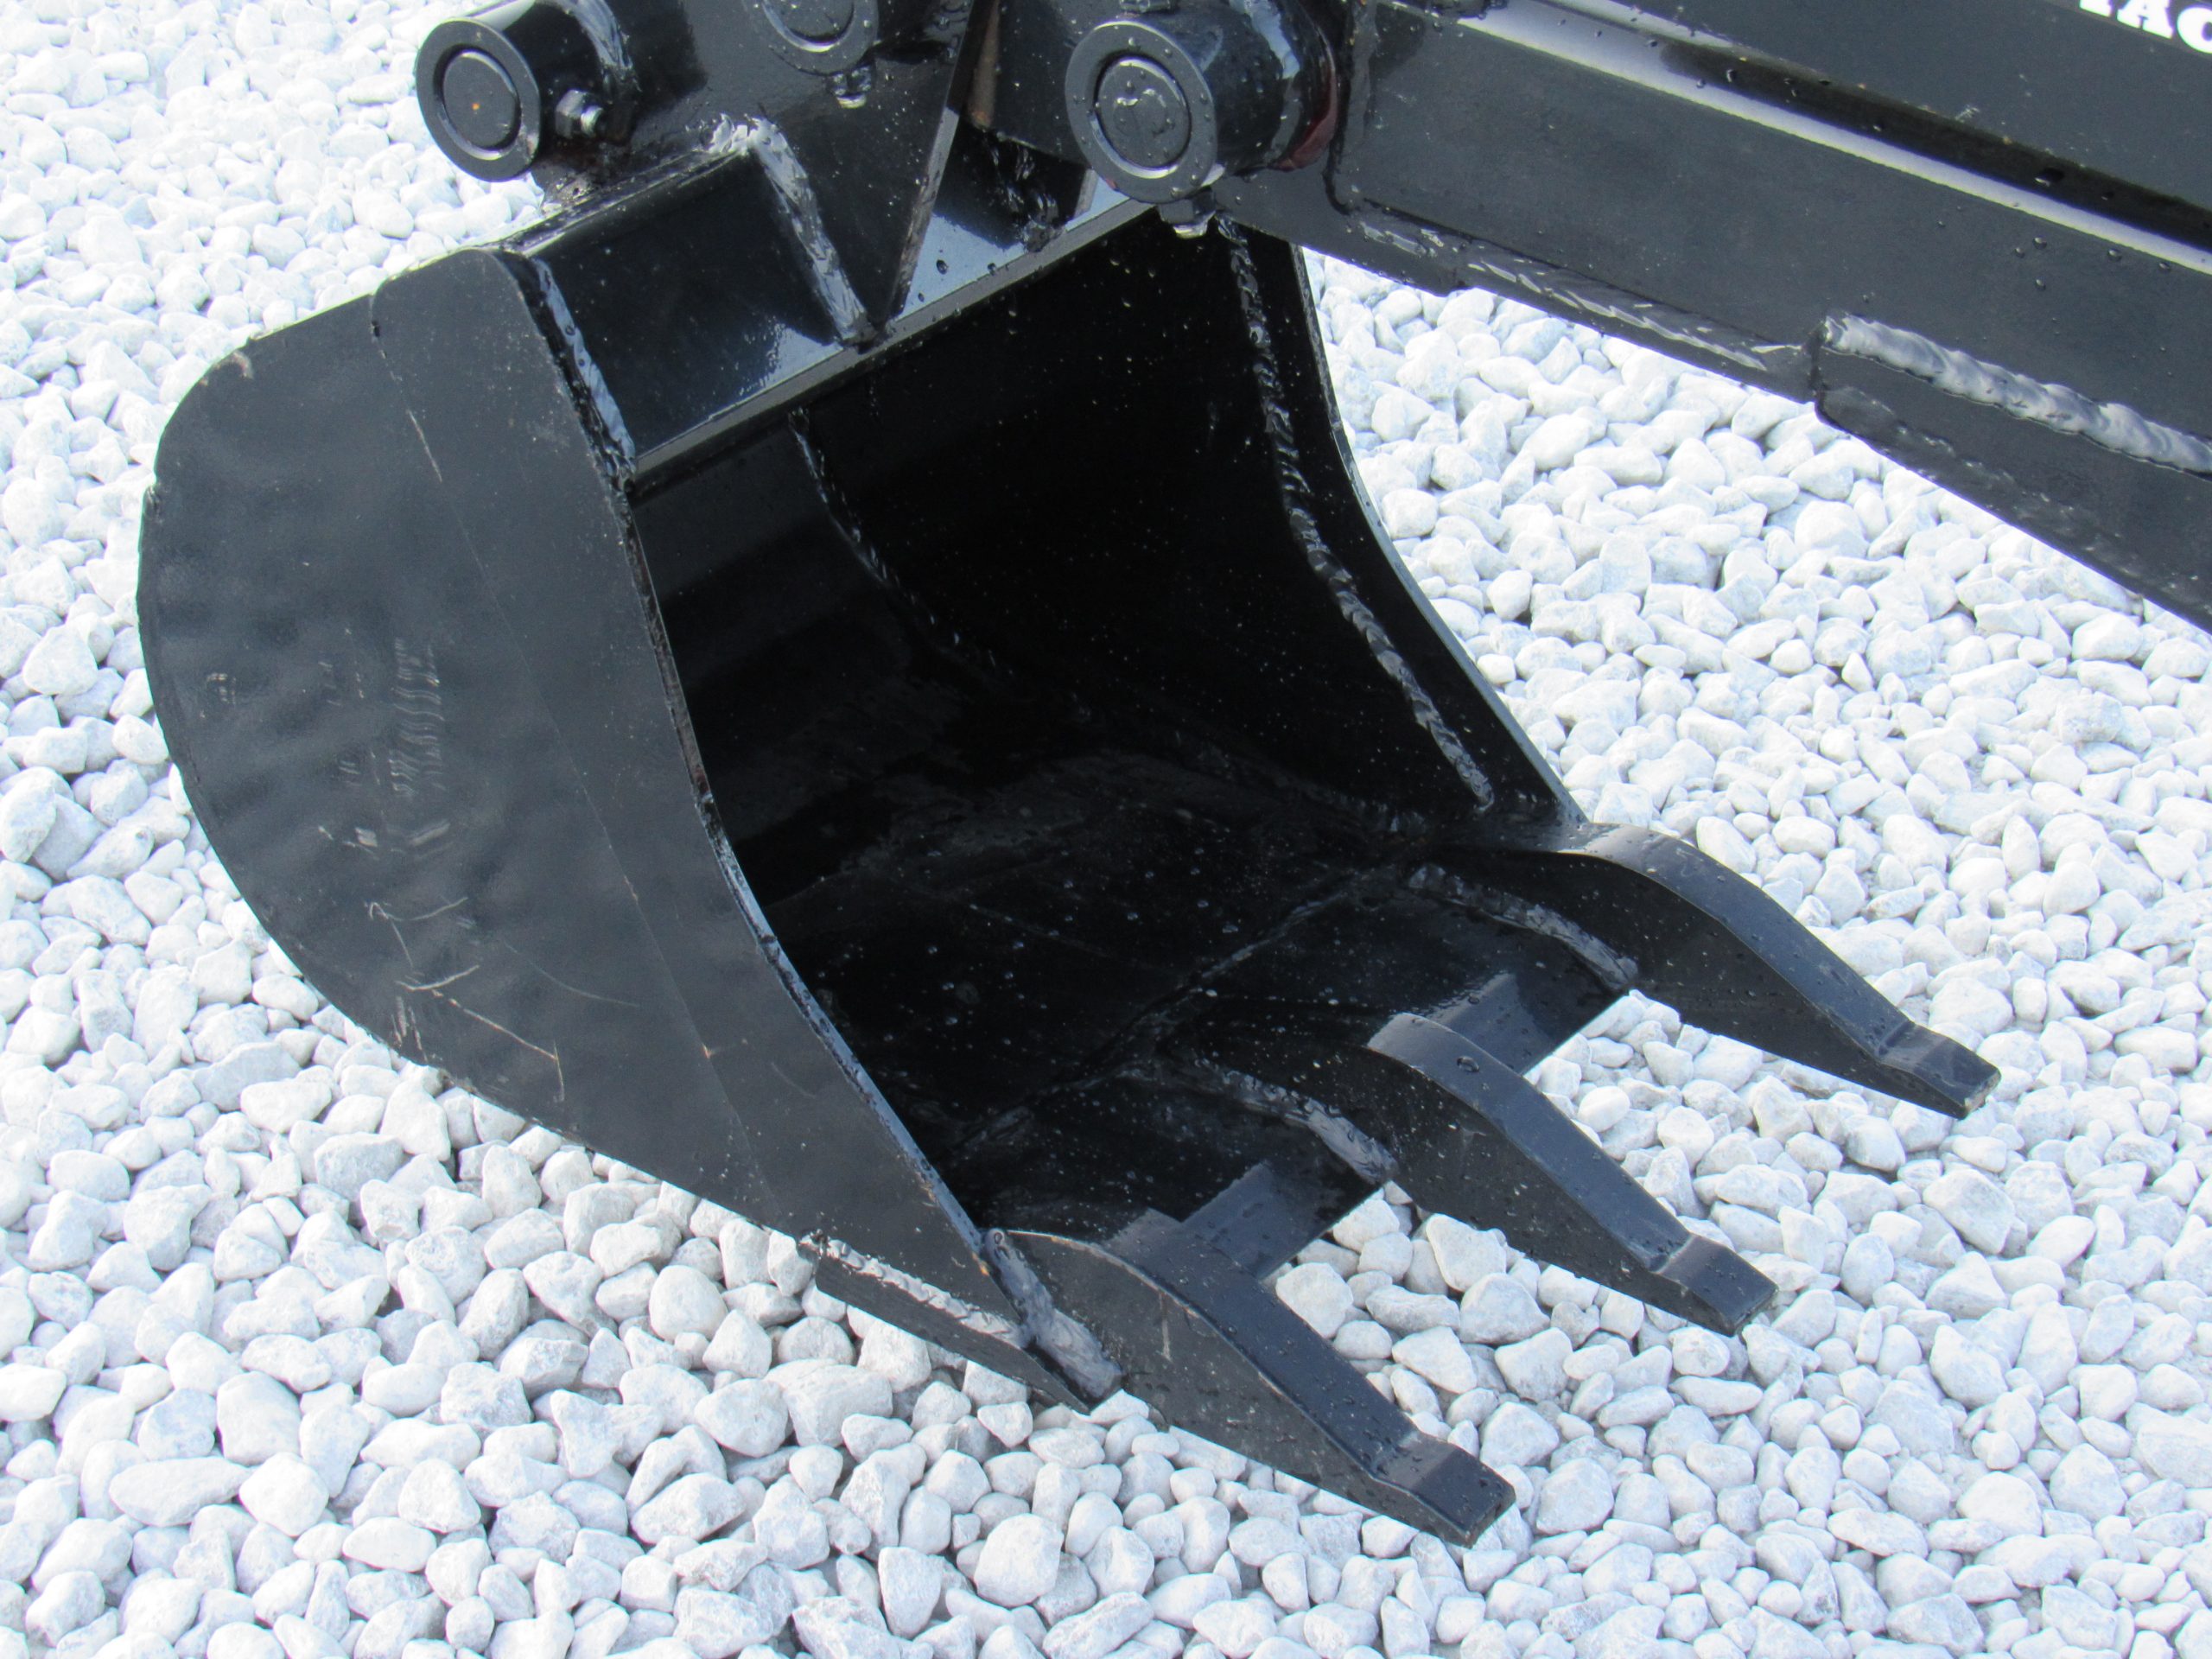 Backhoe Attachment with 12 Bucket Fits Mini Skid Steer